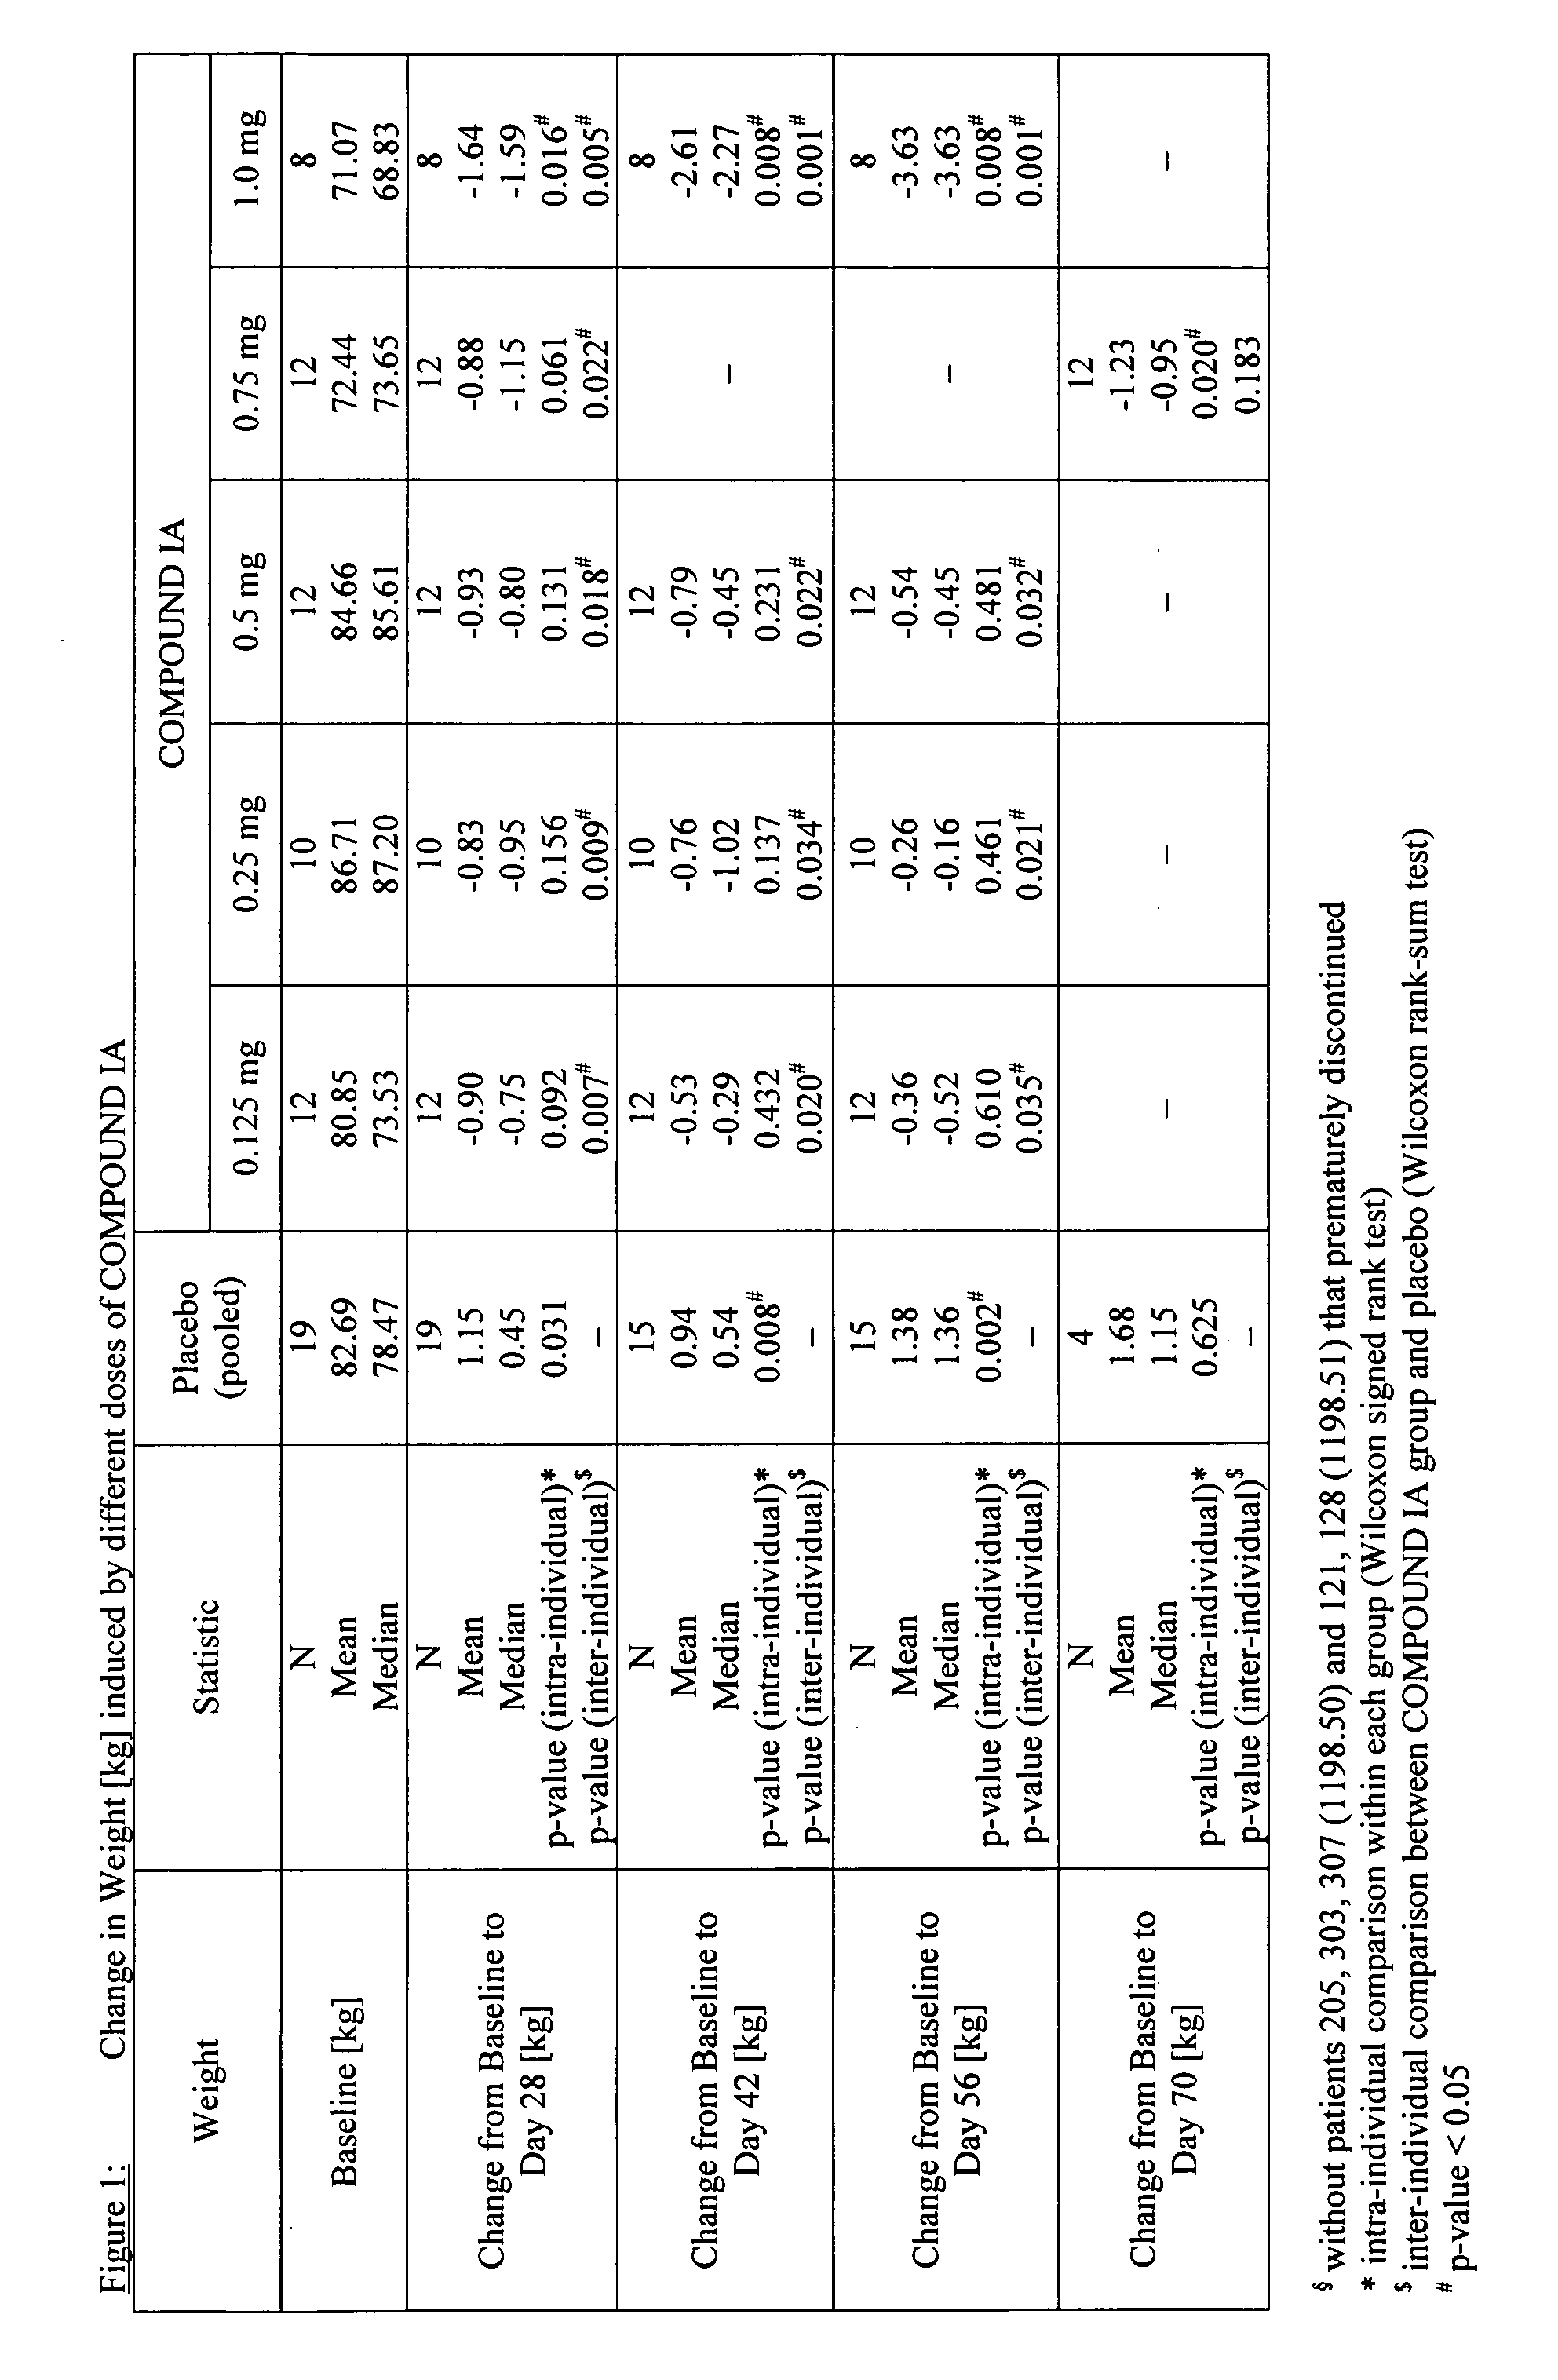 Compounds for the sustained reduction of body weight